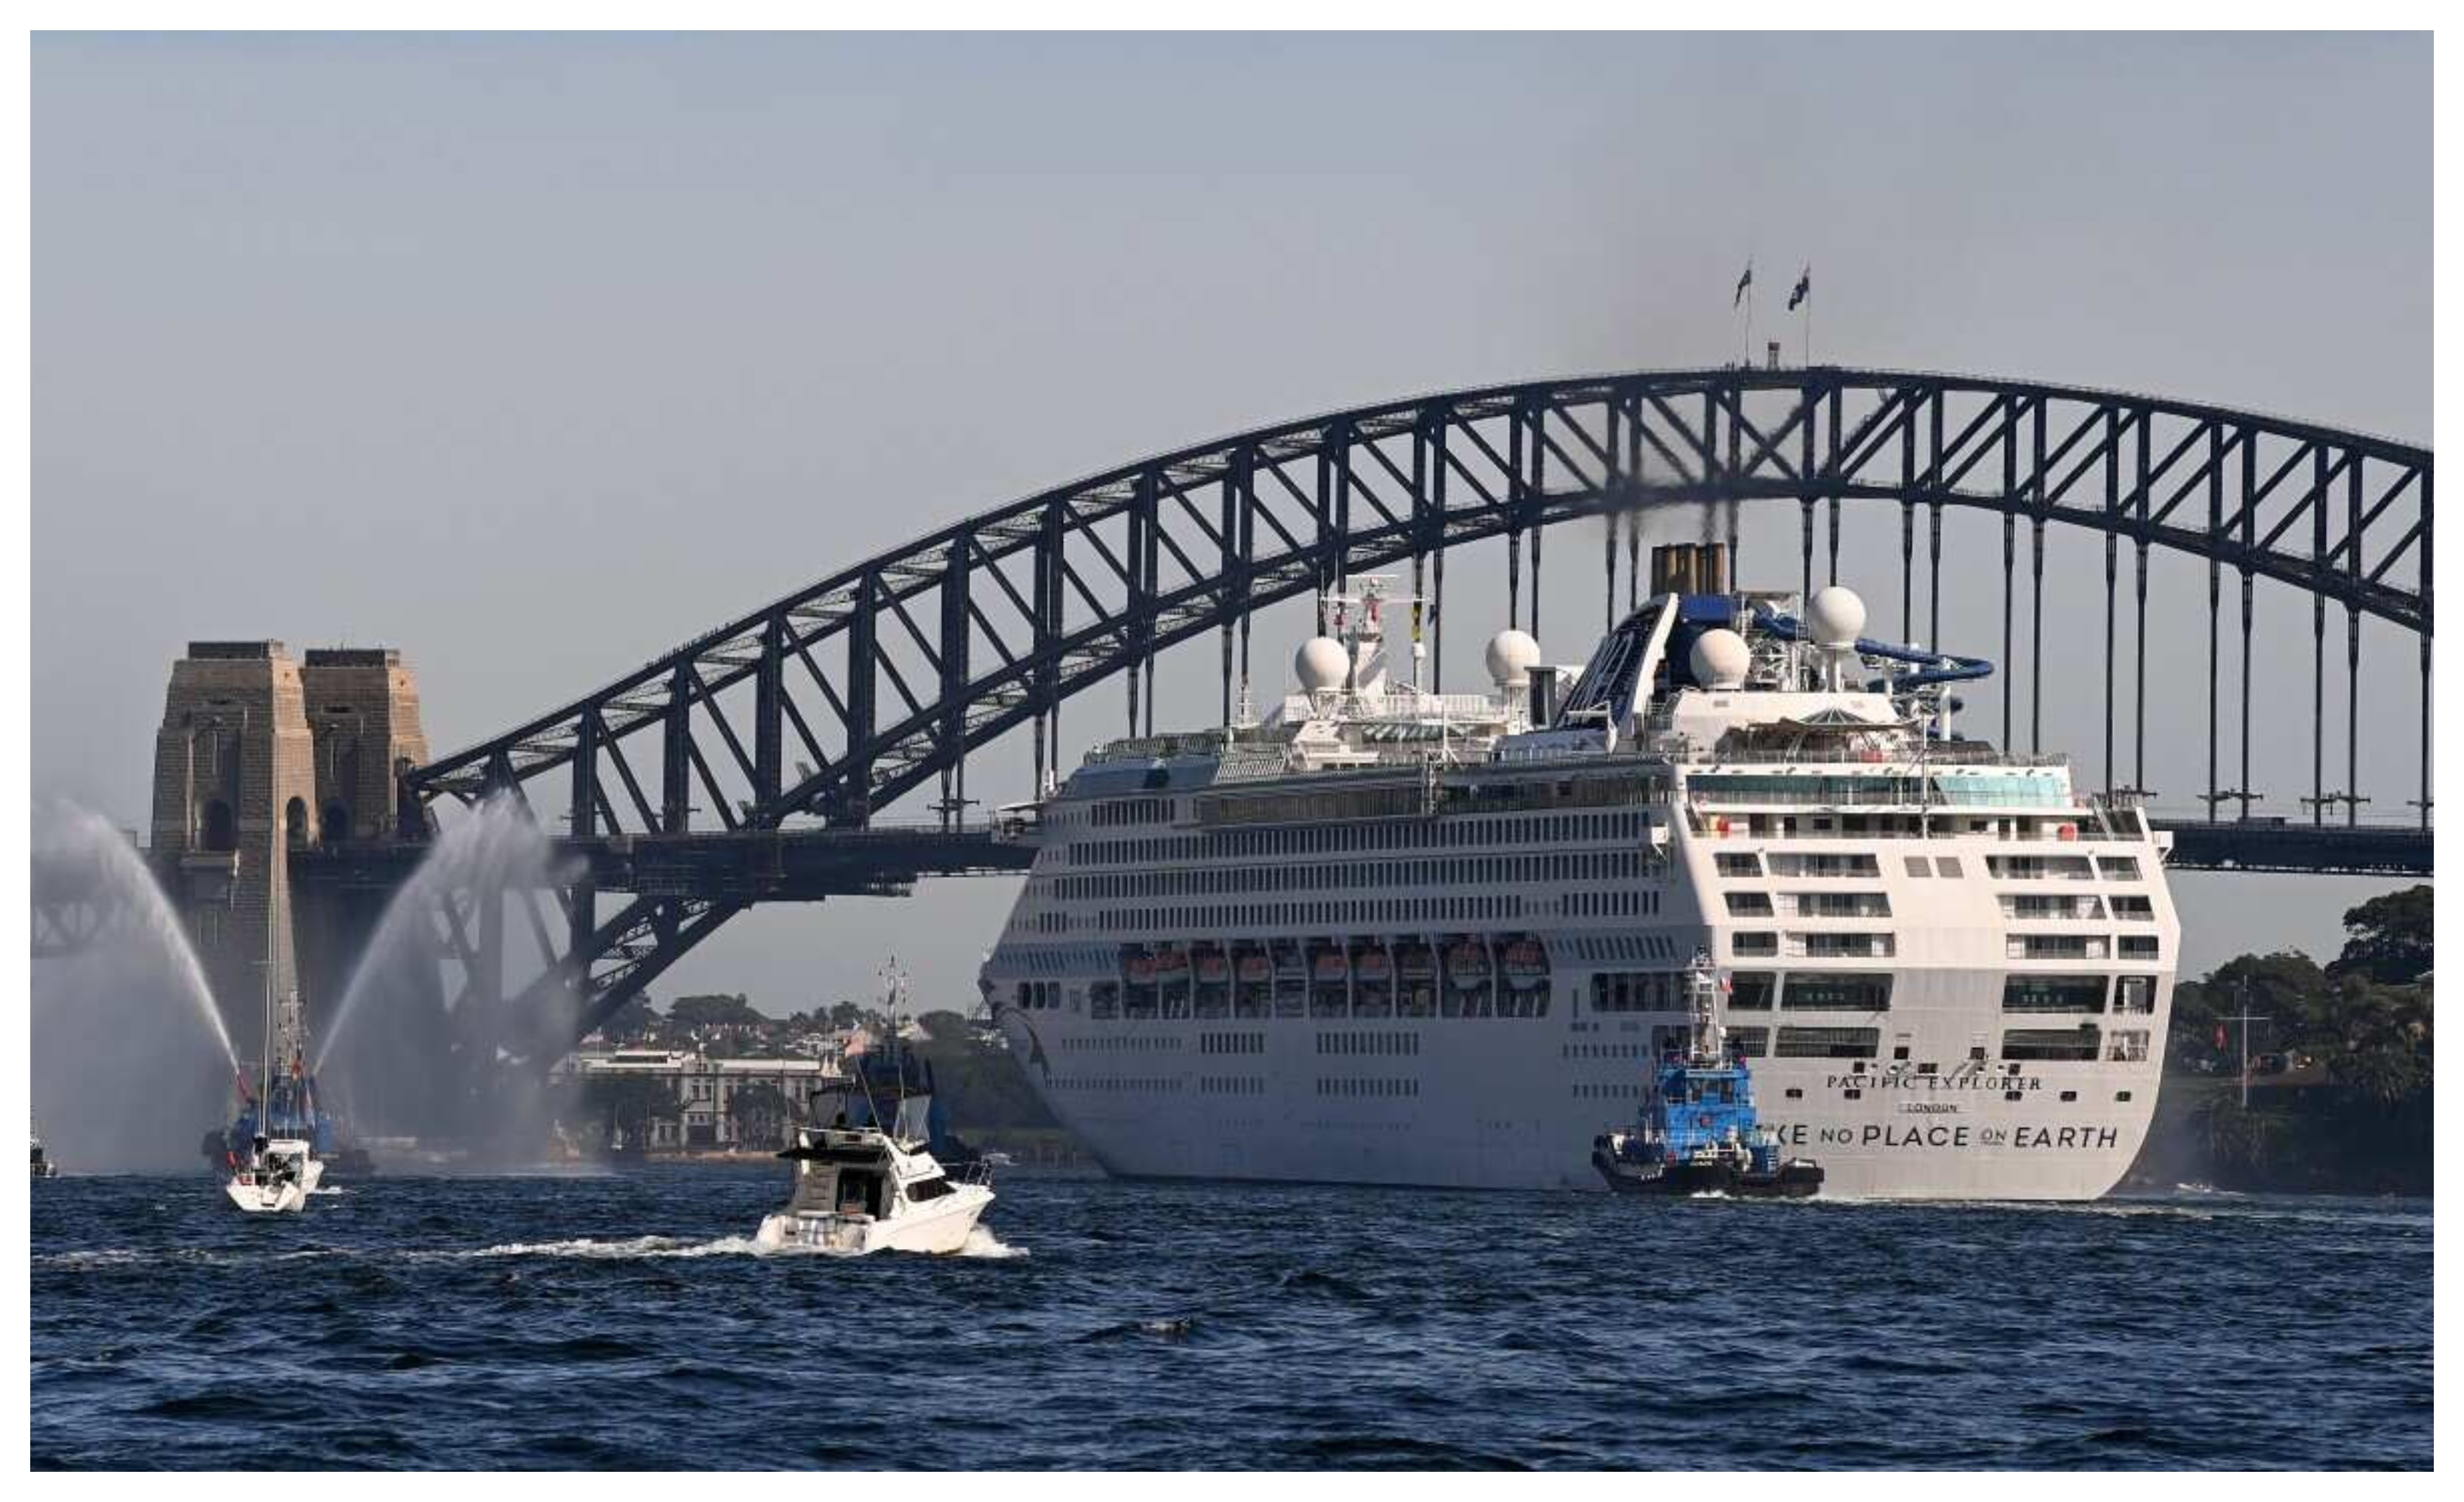 Tug boats with water cannons form a guard of honour and escort the P&O Cruises Australia flagship Pacific Explorer is it enters Sydney Harbour.